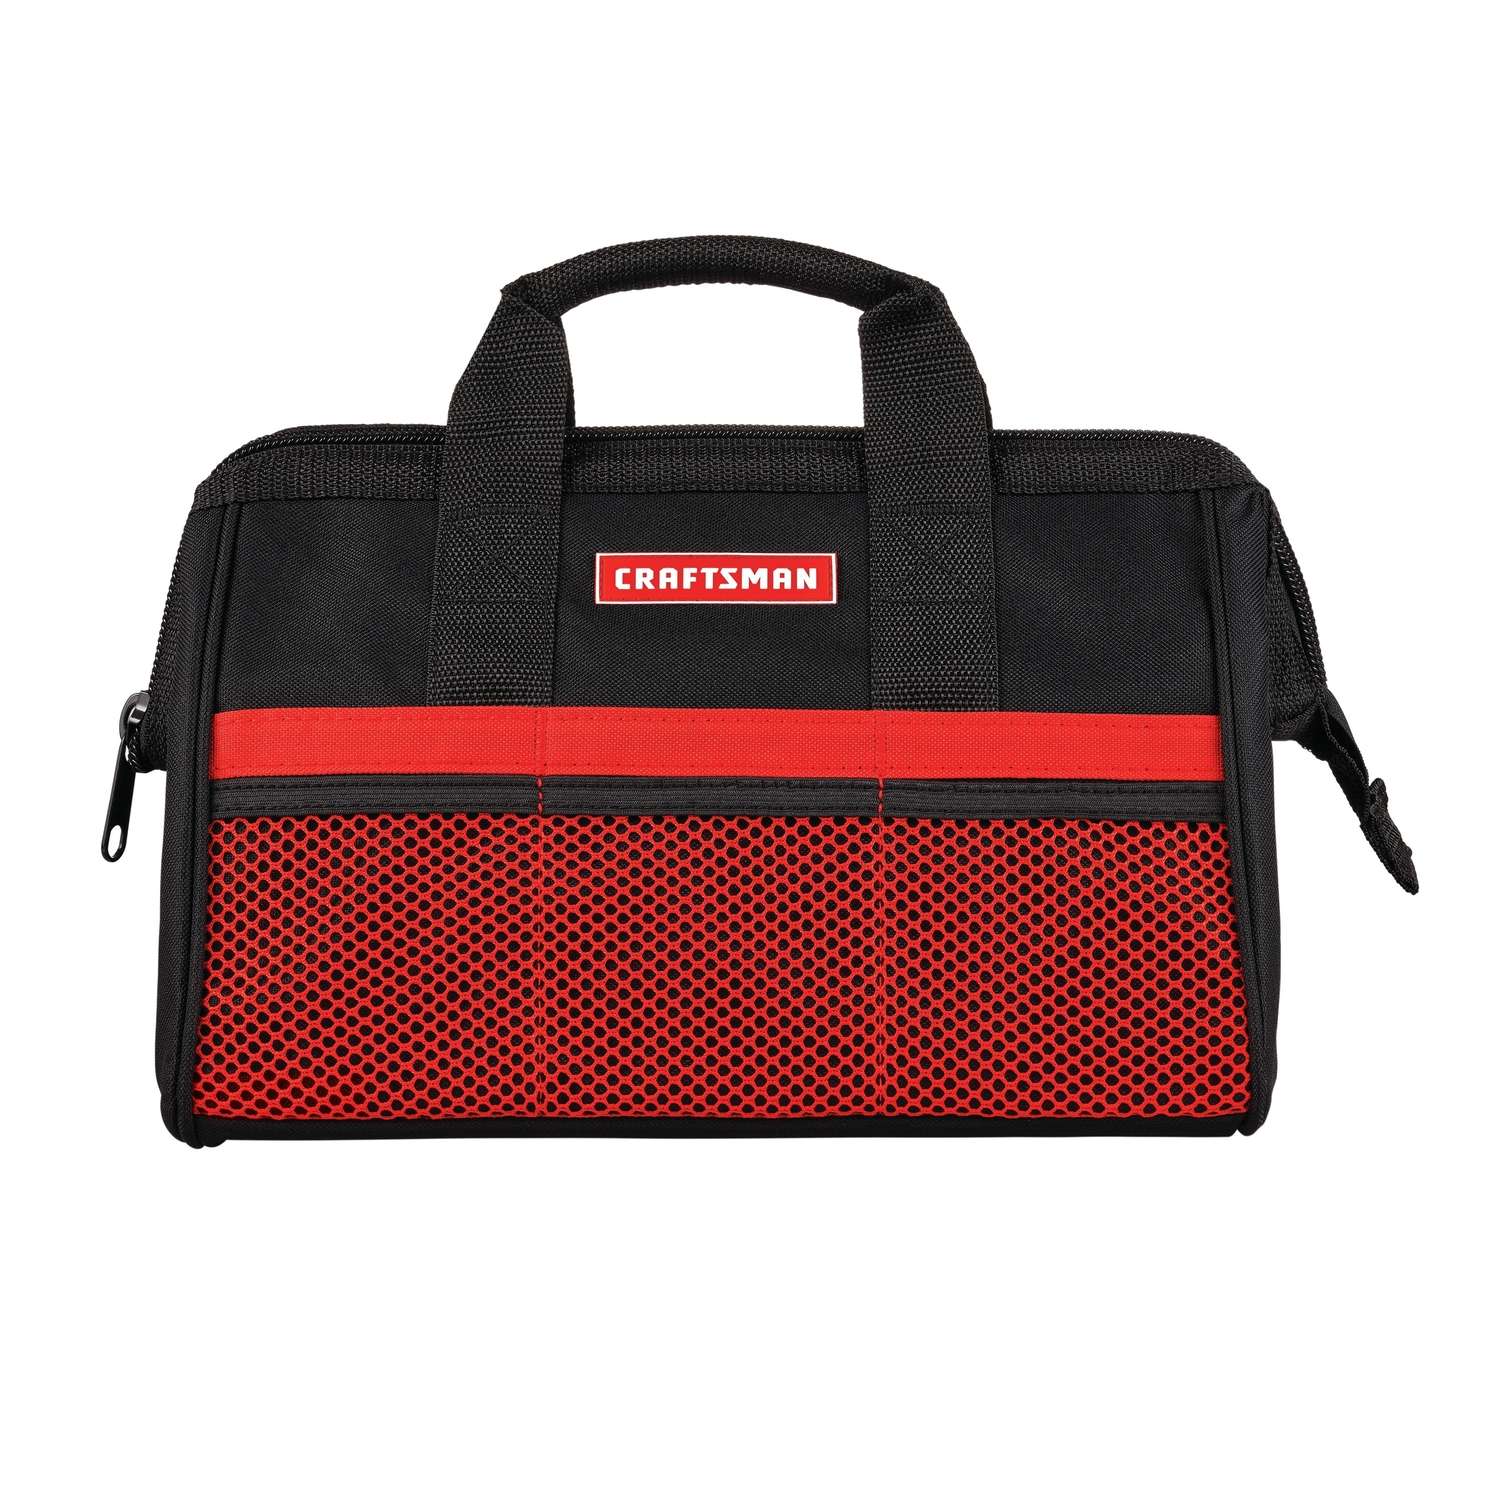 Craftsman 13 in. W Wide Mouth Tool Bag 6 pocket